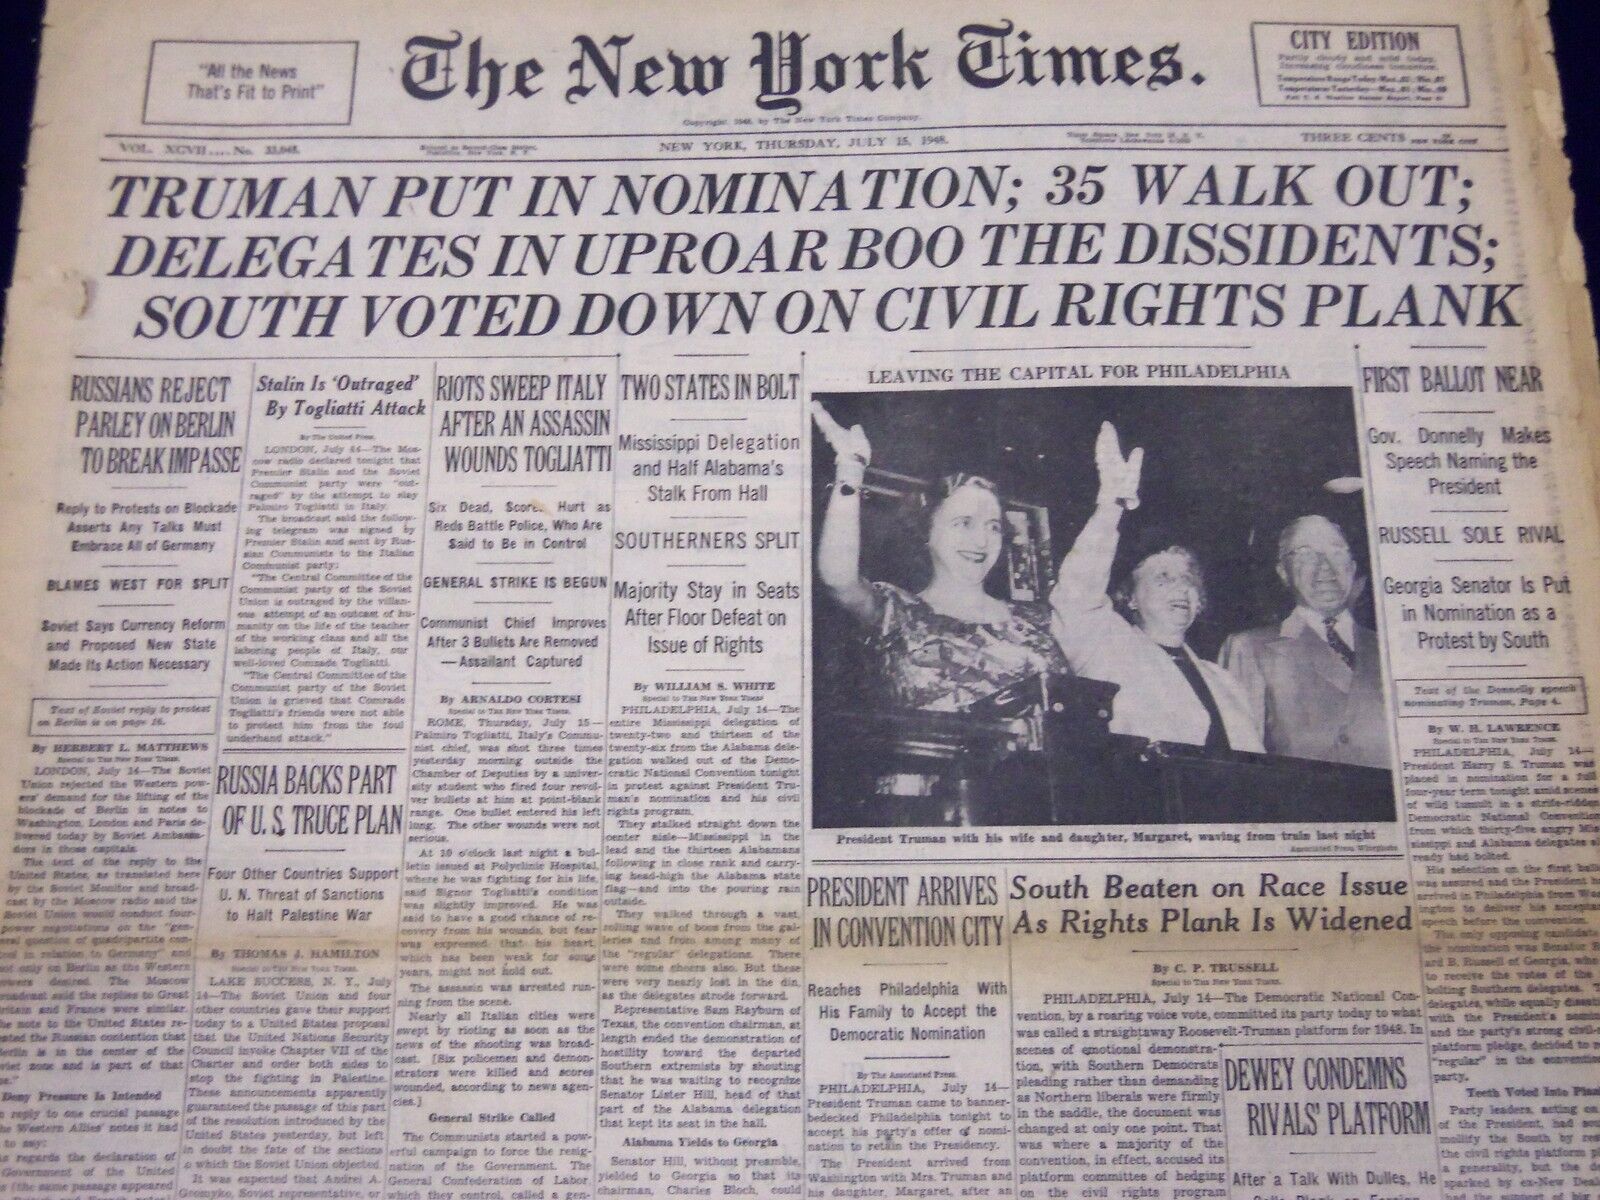 1948 JUL 15 NEW YORK TIMES - TRUMAN PUT IN NOMINATION, 35 WALKOUT - NT 156